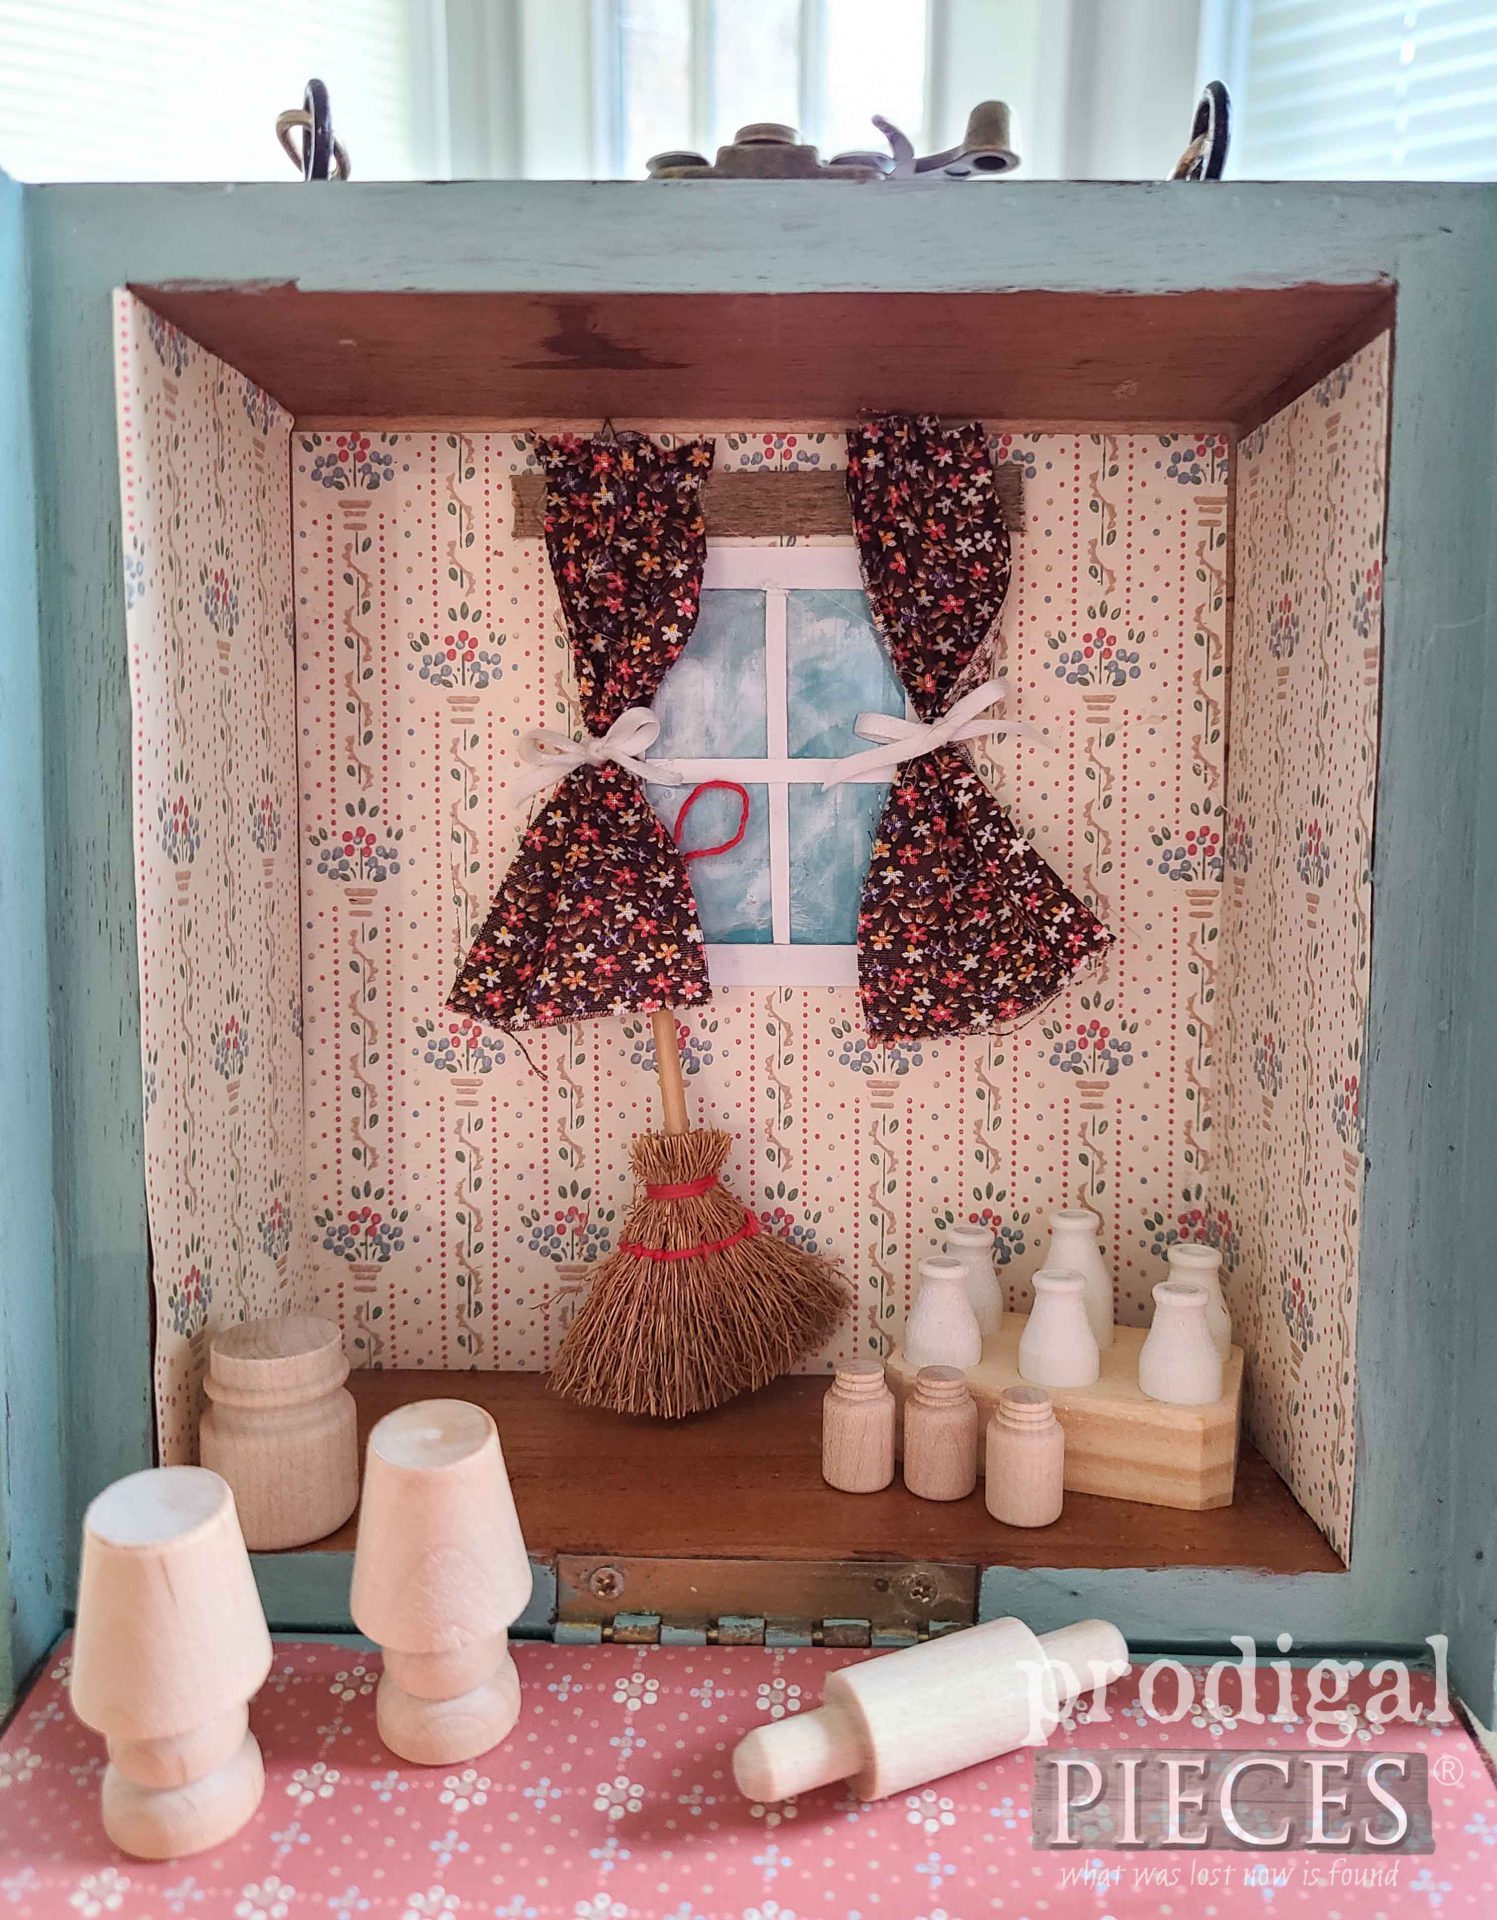 DIY Travel Dollhouse with Prairie Accessories of Upcycled Cigar Box by Larissa of Prodigal Pieces | prodigalpieces.com #prodigalpieces #diy #toys